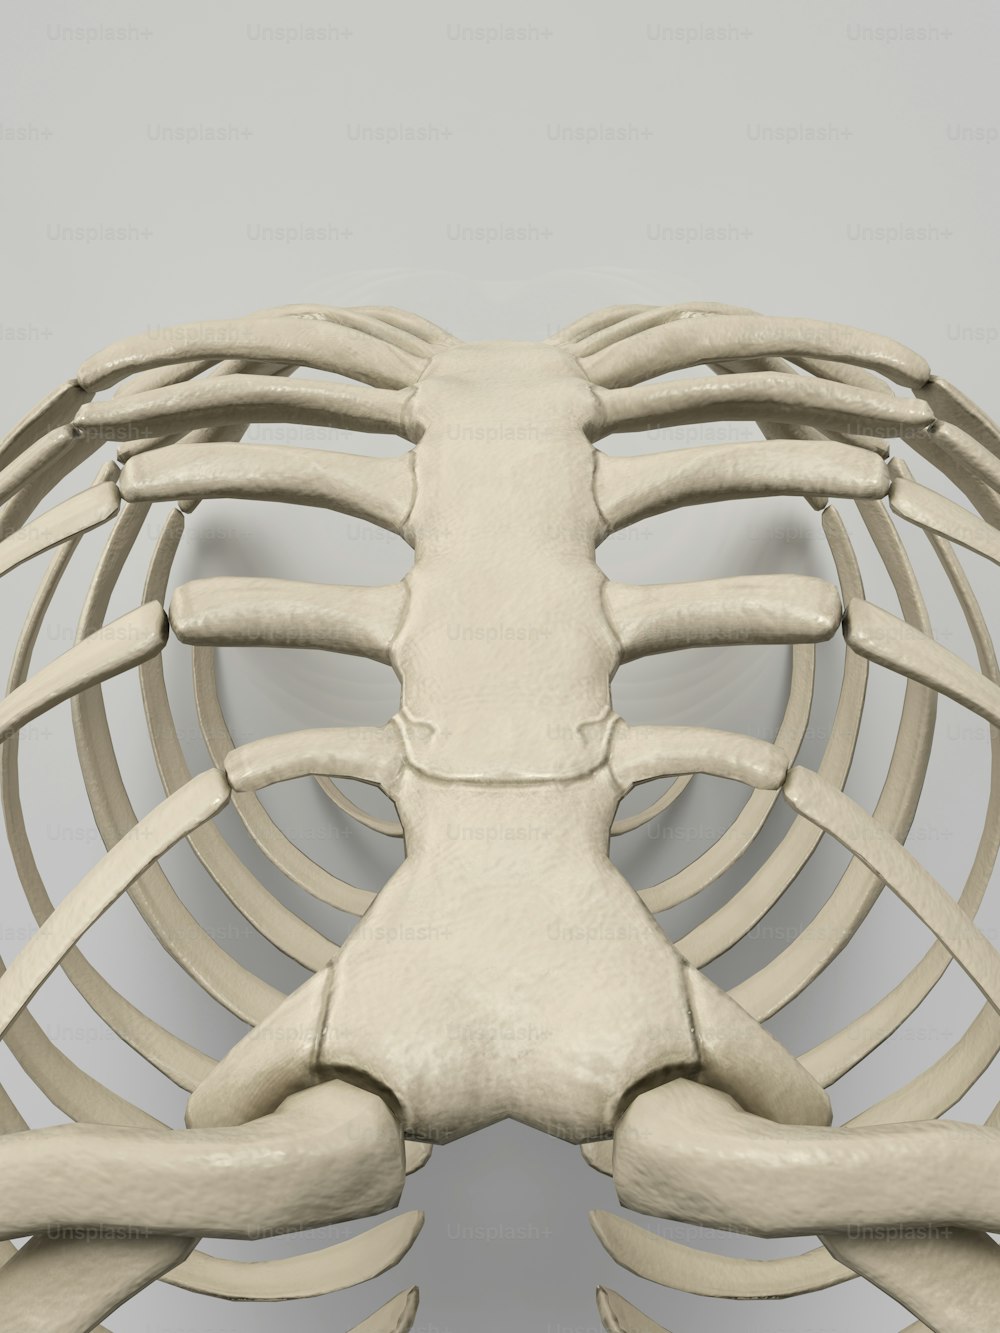 a model of the back of a human skeleton